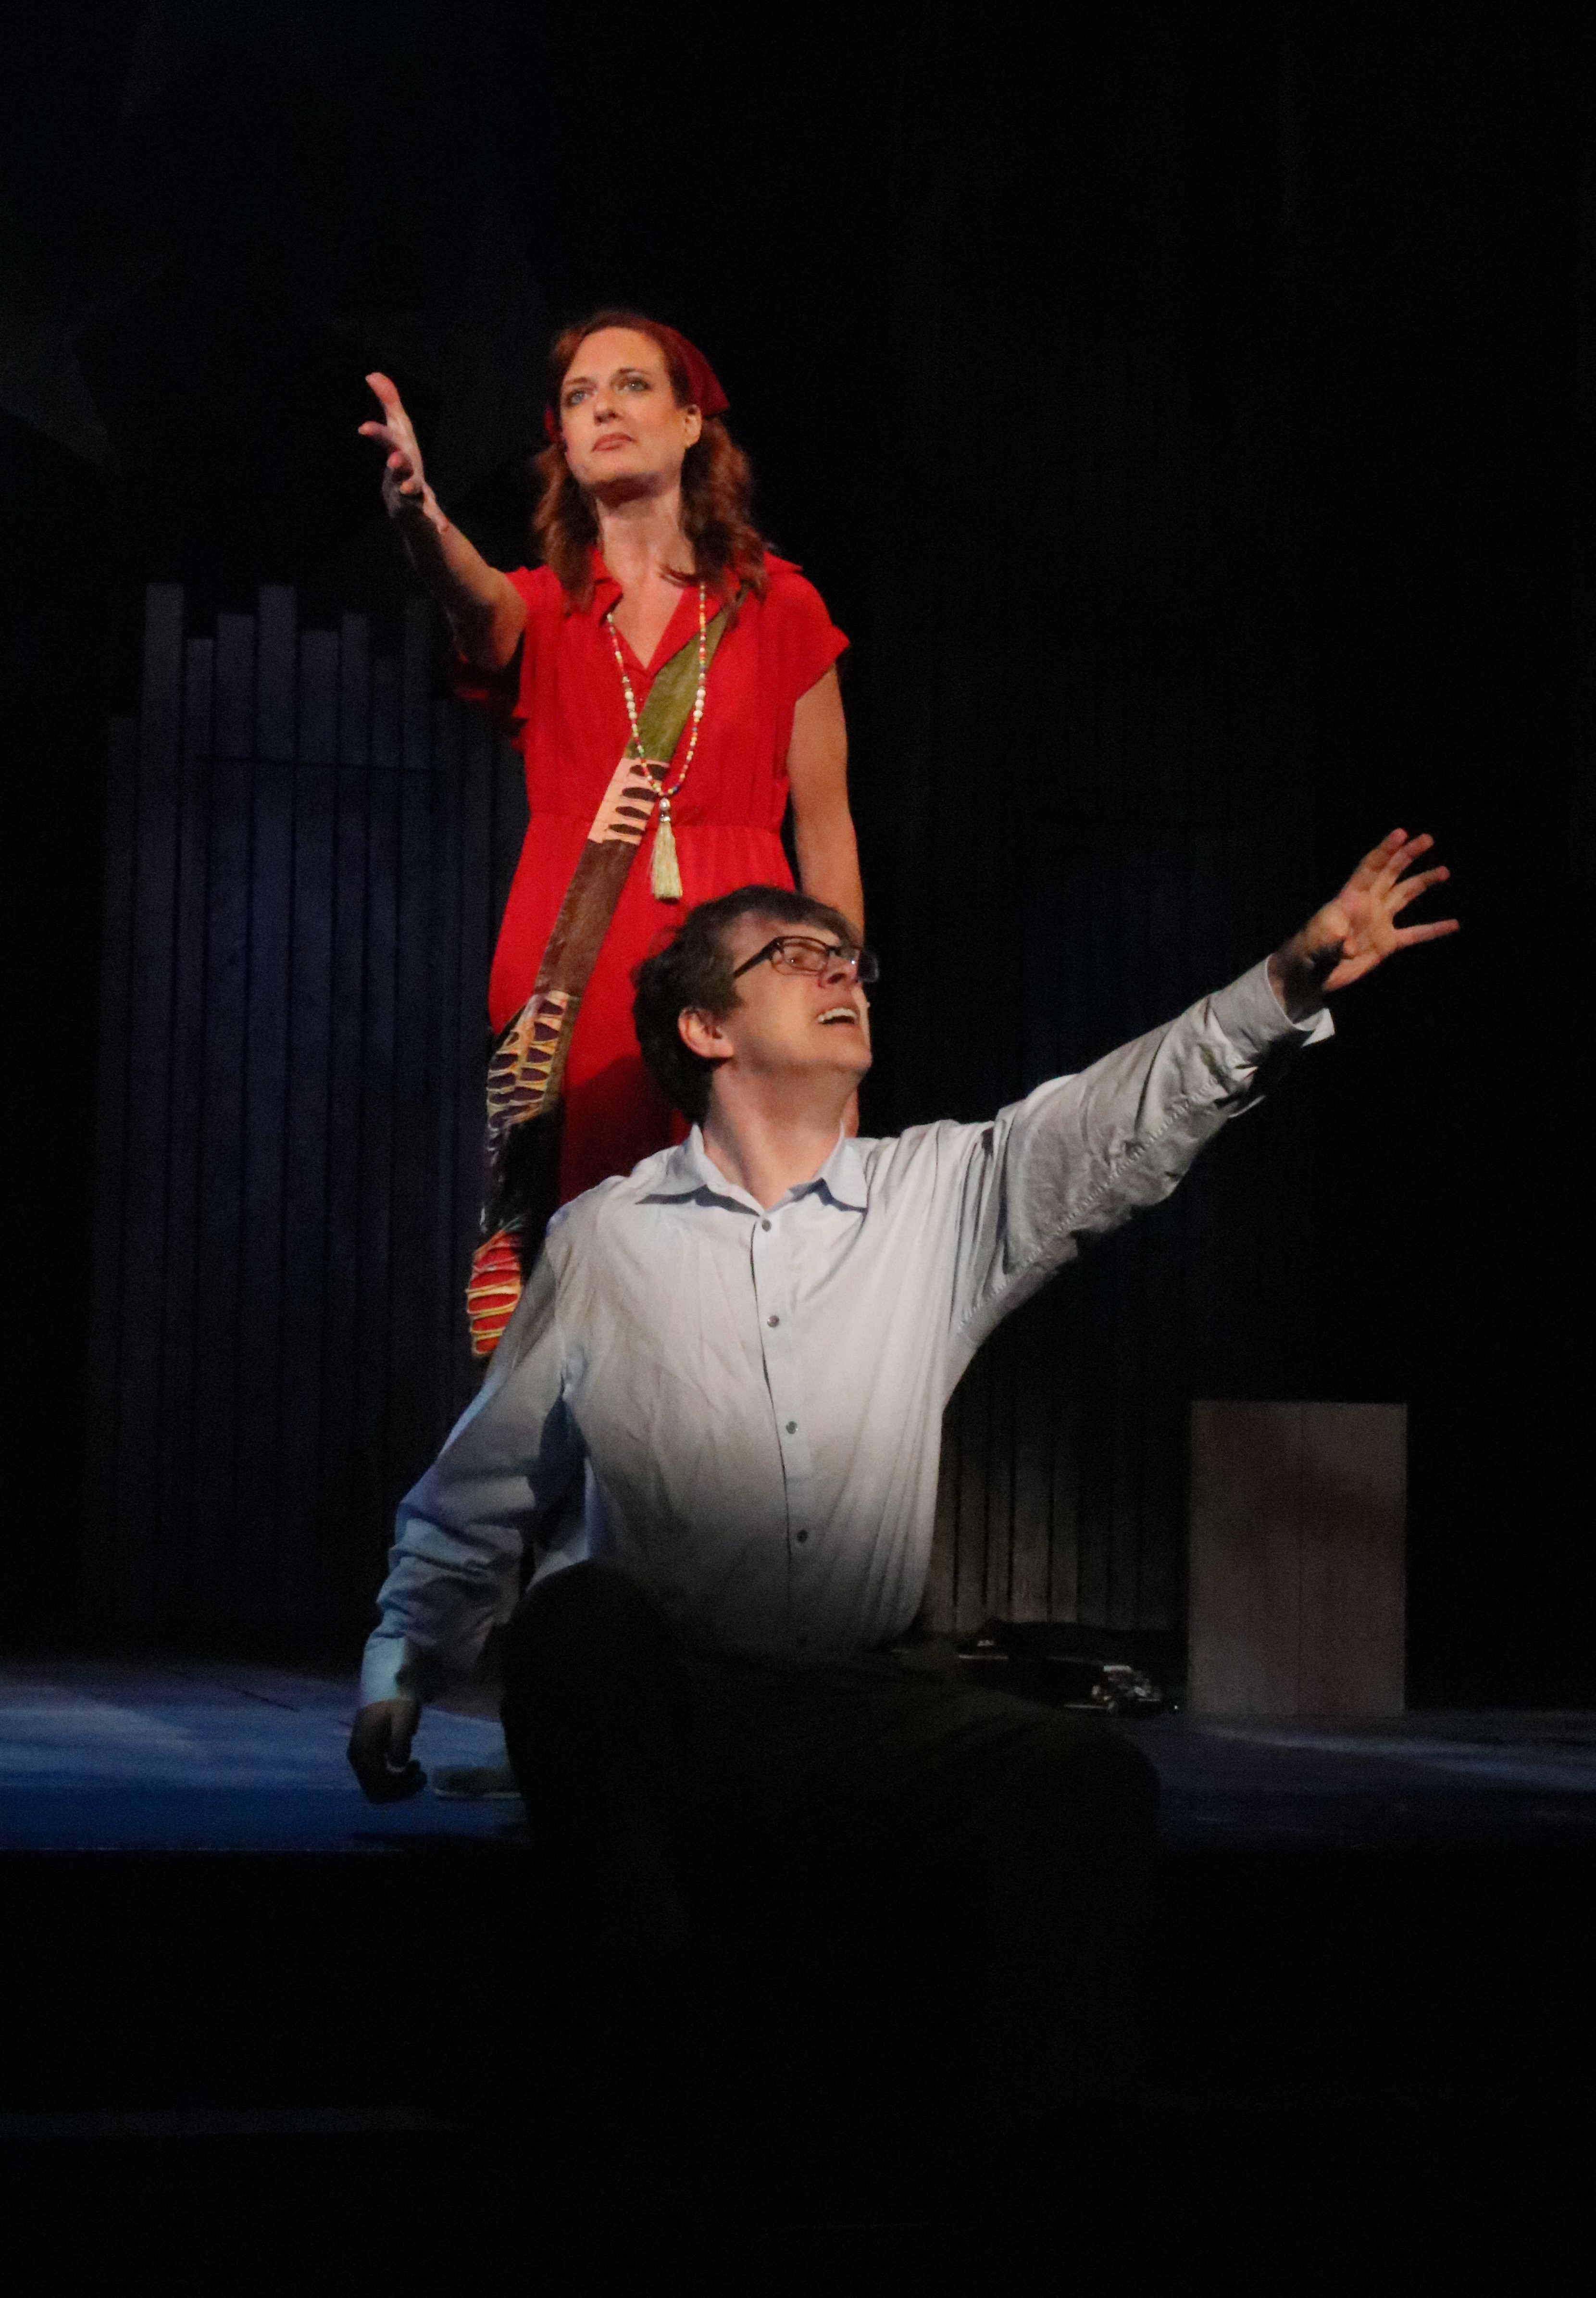 Squeaky Fromme and John Hinckley, Jr. played by Jennifer Silverman and Adam Bloom in ASSASSINS at Curtain Call, Stamford, CT - June 2 - 17.